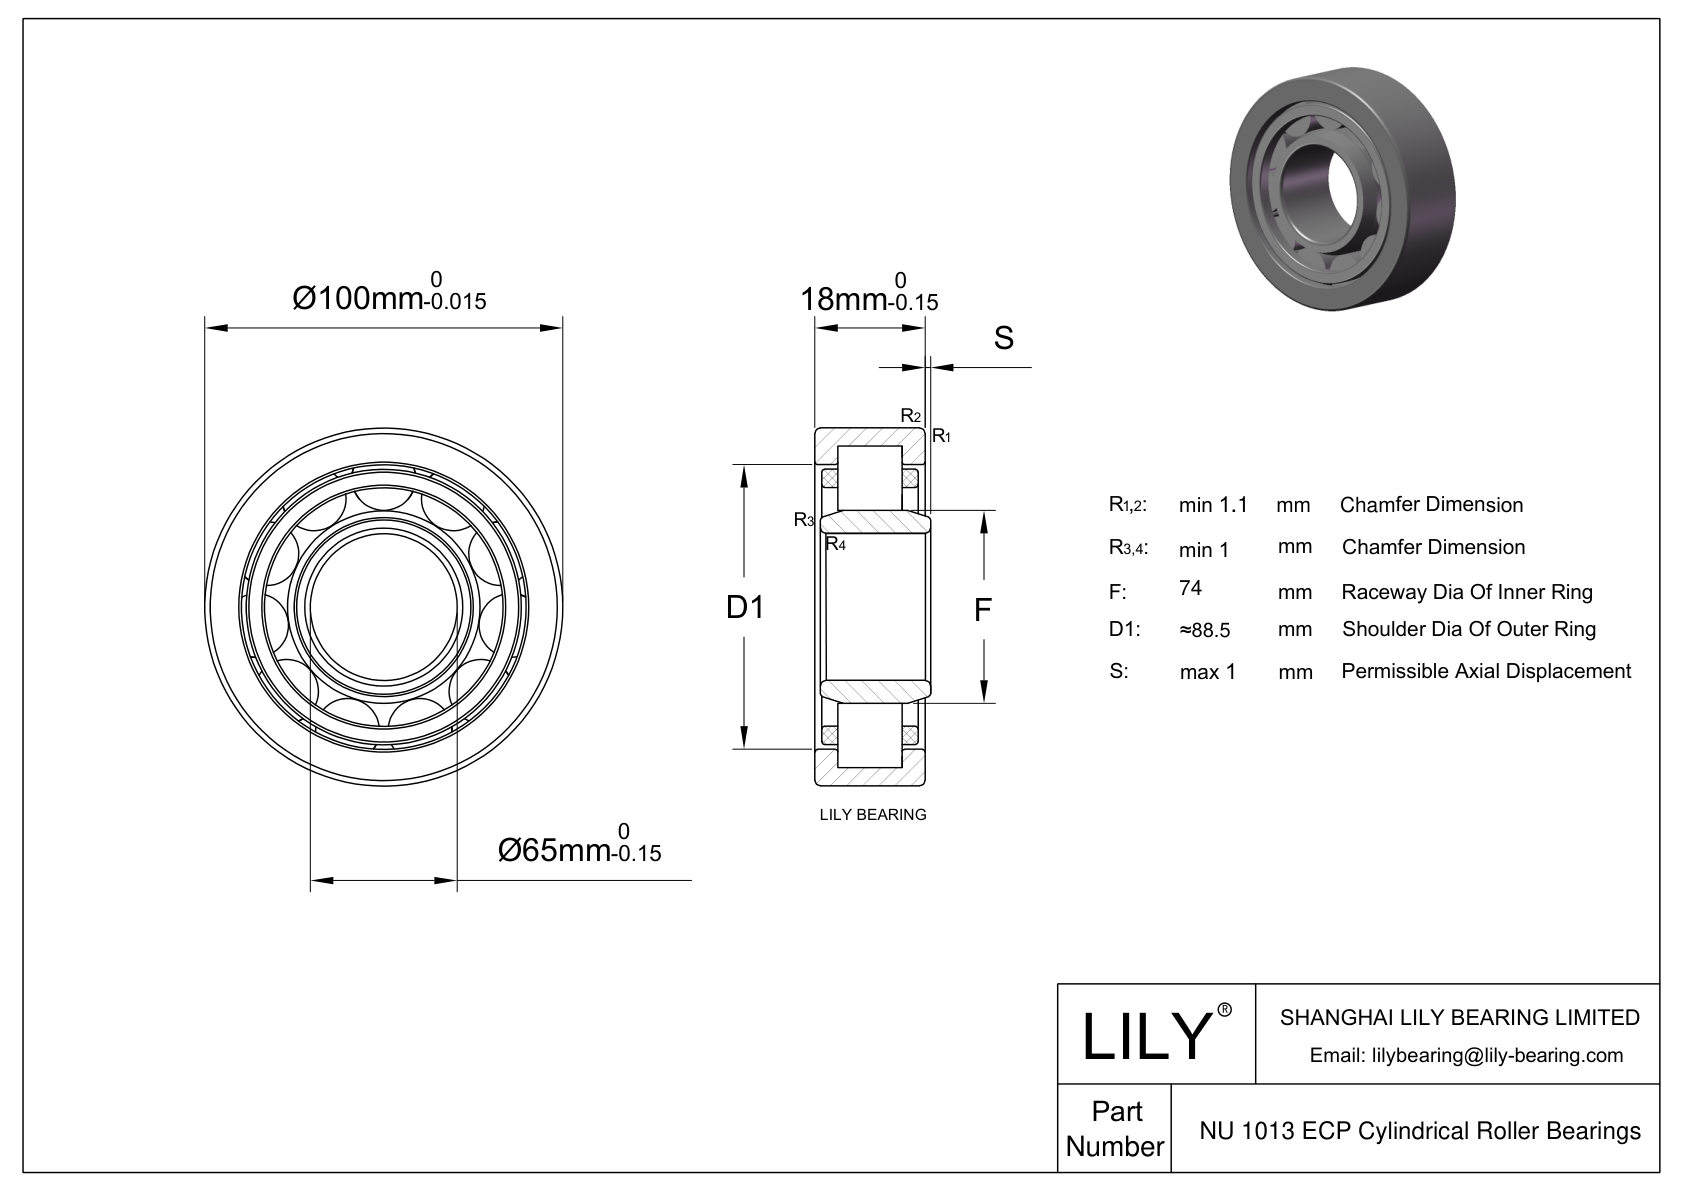 NU 1013 ECP/C3VL0241 Ceramic Coated Cylindrical Roller Bearings cad drawing